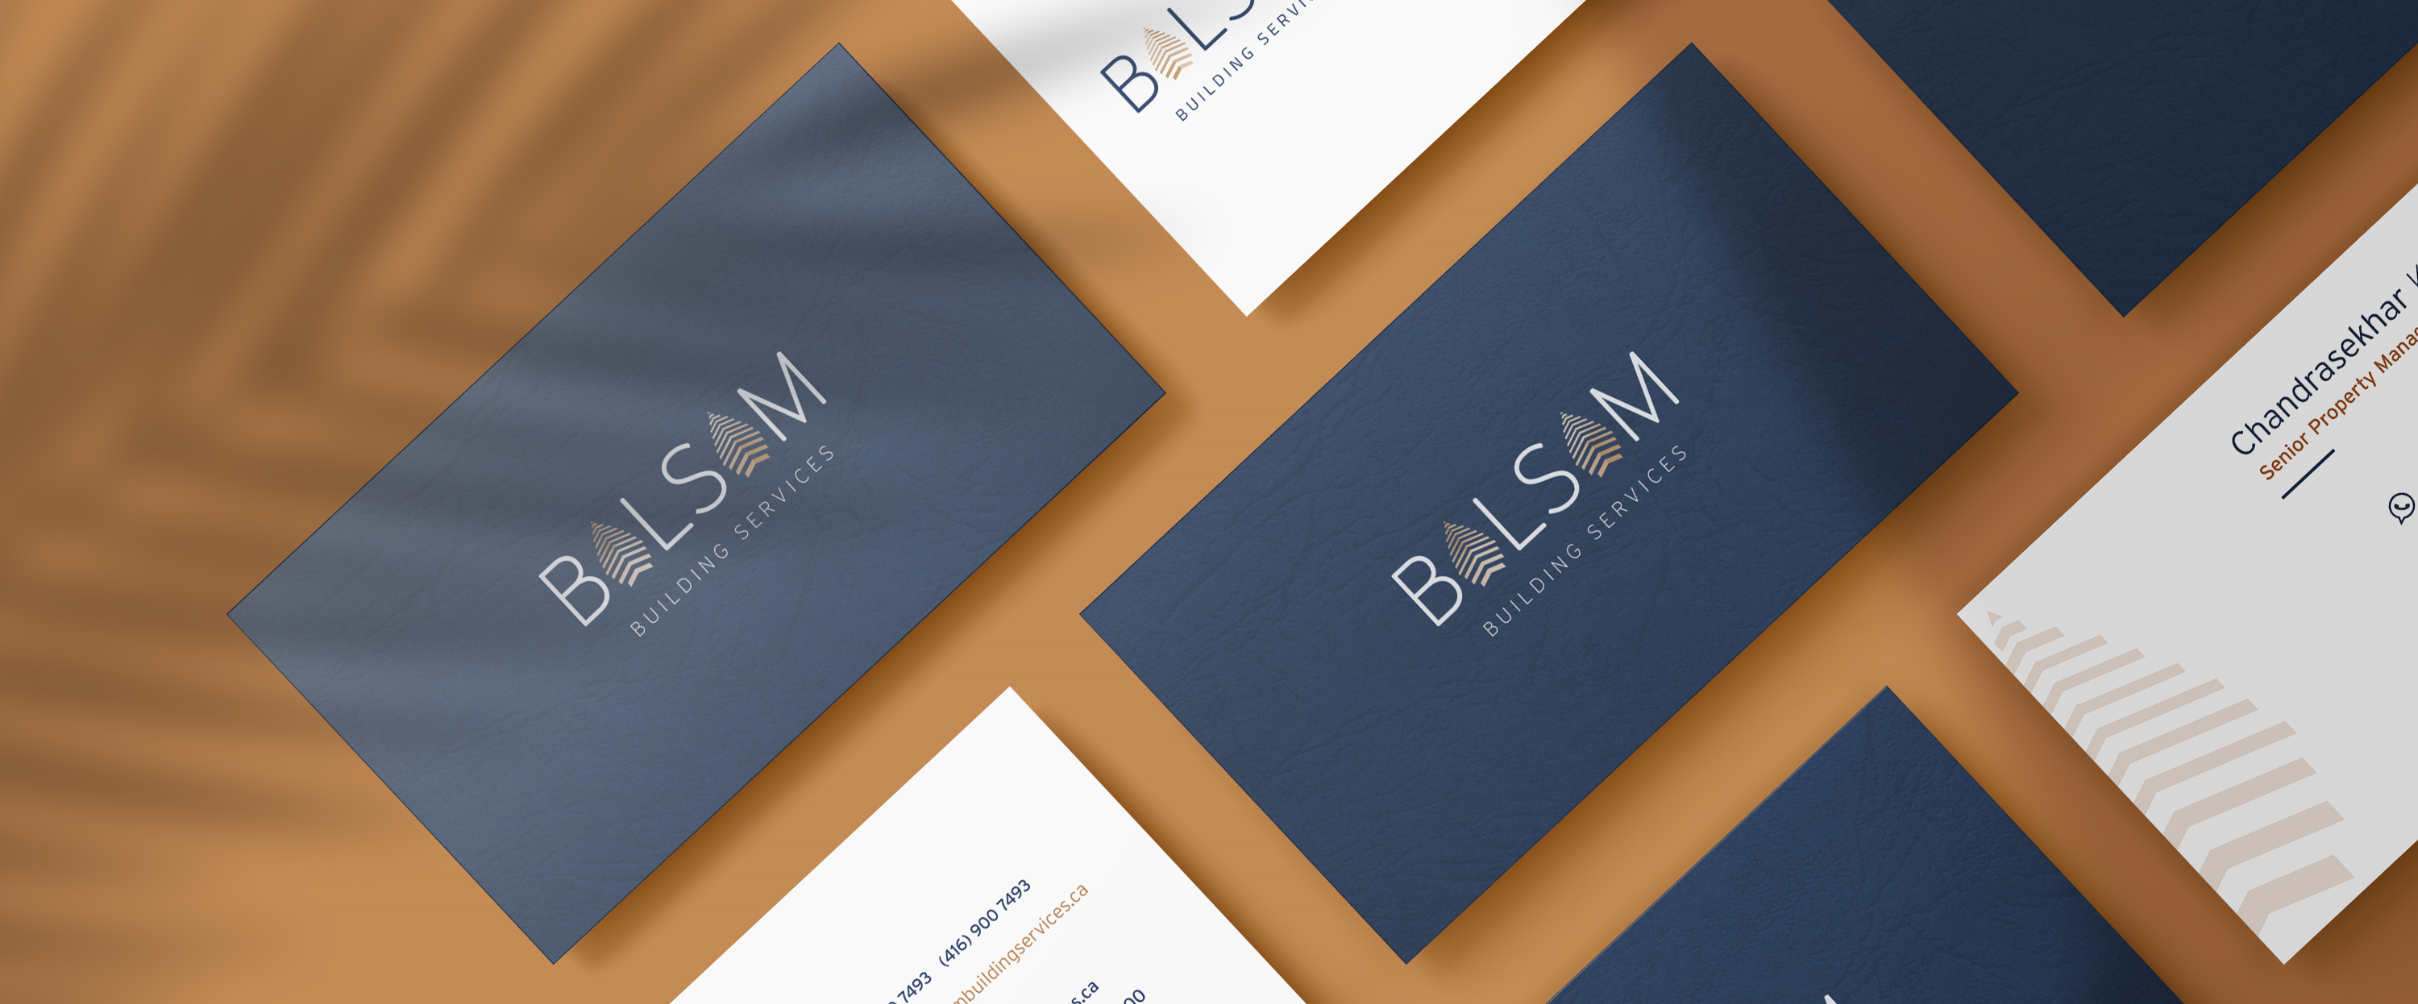 Visiting Card for Client Balsam Building Services